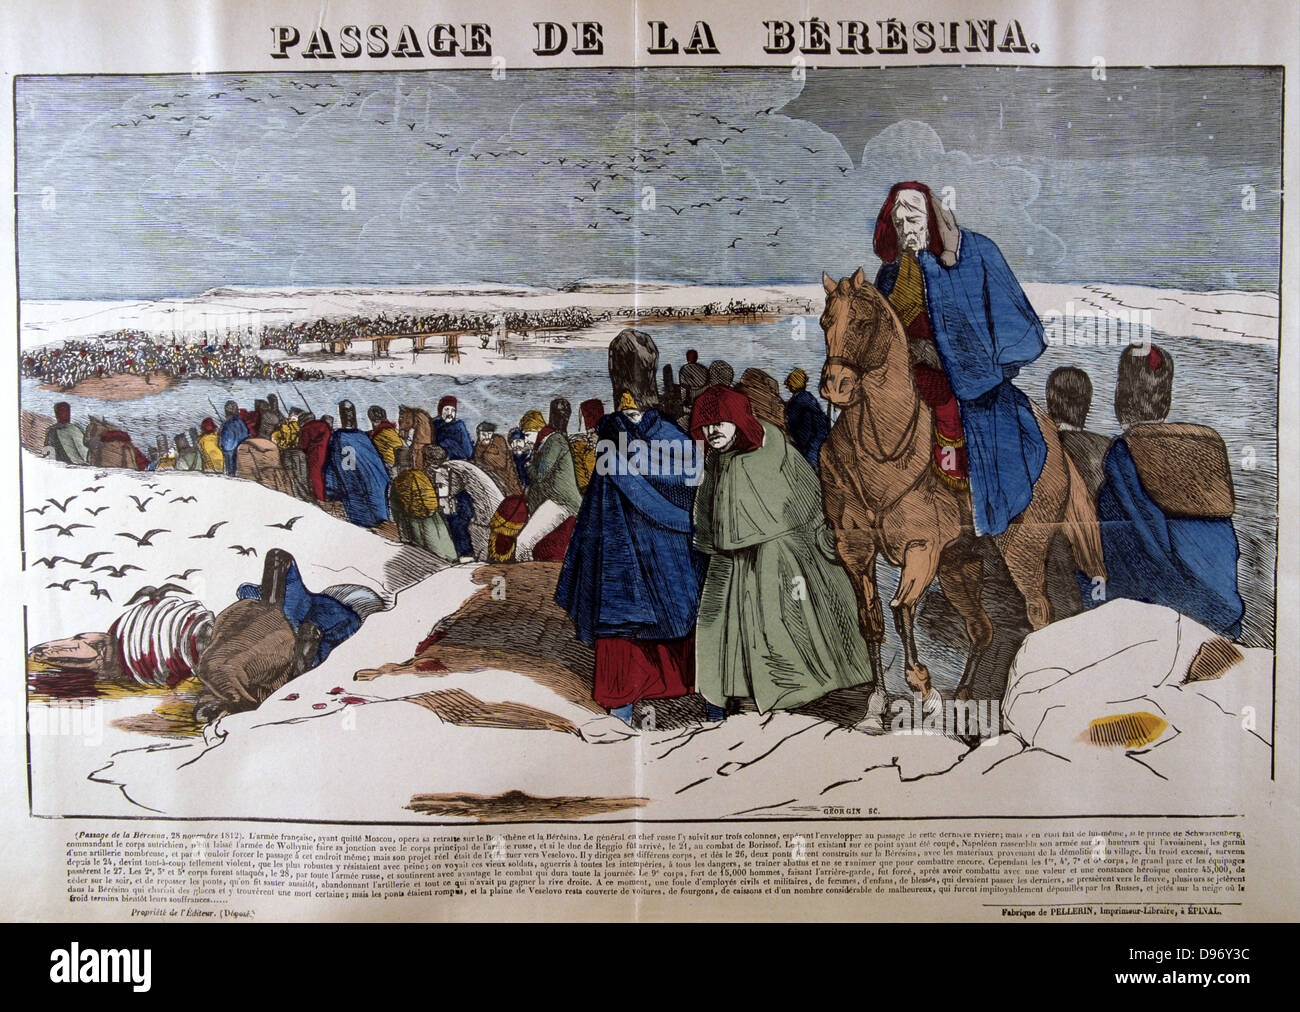 Napoleon's Grande Armee retreating from Russia across the Beresina, 26-28 November 1812. 19th French popular hand-coloured woodcut. Stock Photo